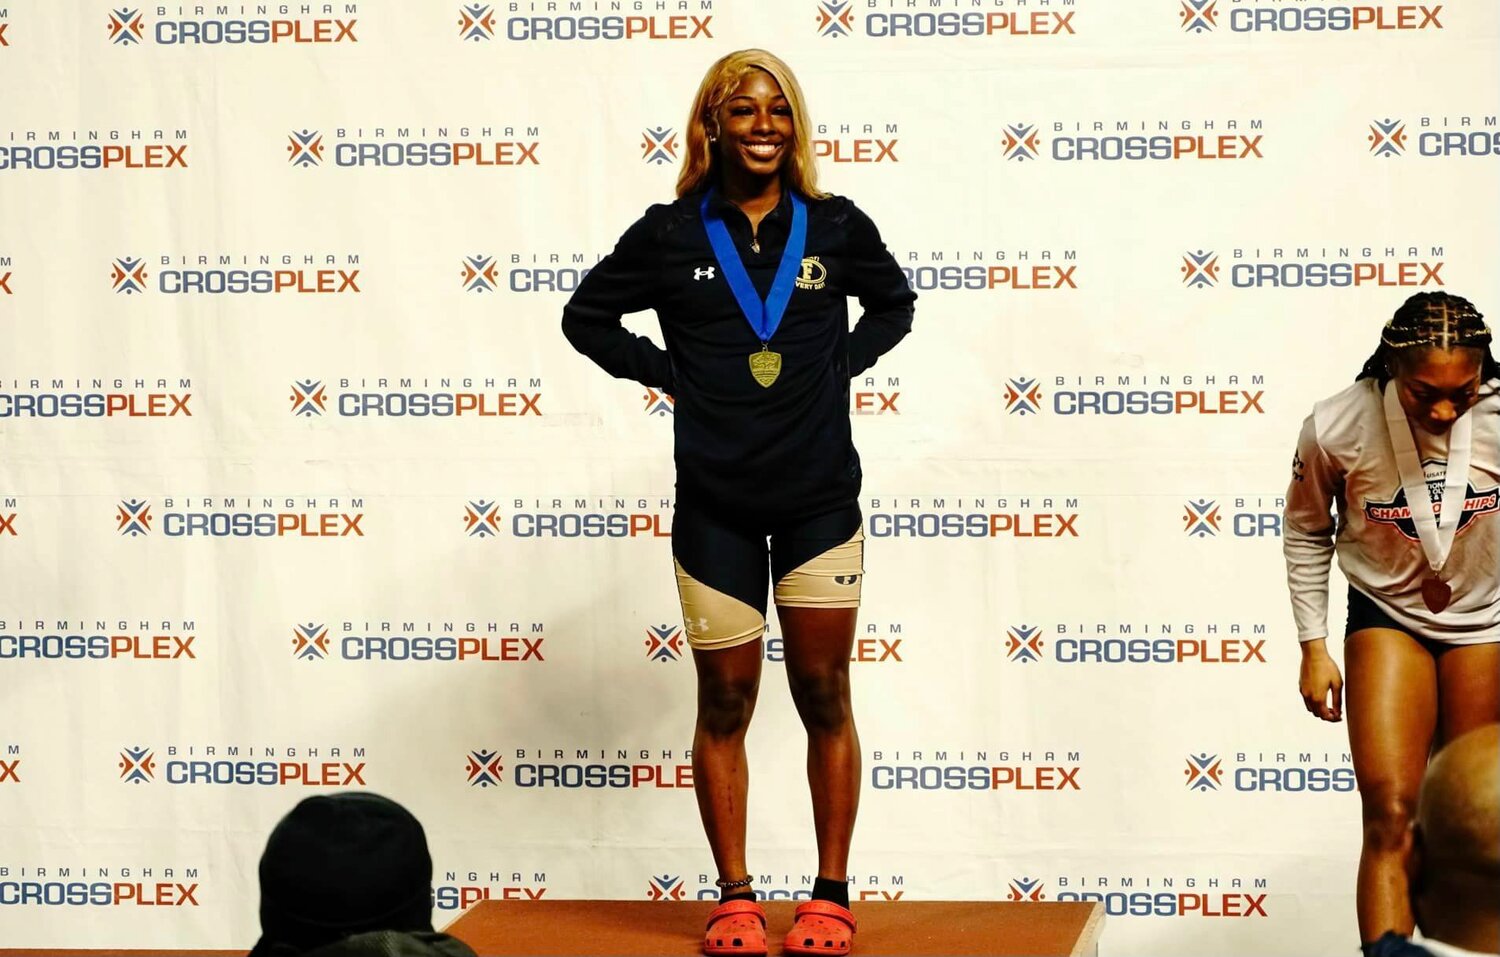 Foley senior Destiny Roper took the top spot on the Birmingham Crossplex’s podium with a 7.66 in the 60-meter dash on Saturday, Jan. 27, during the Last Chance Invitational. Roper returned to the podium on Saturday, Feb. 3, during the AHSAA Class 7A State Indoor Track Championships with a third-place finish in 7.77 seconds.